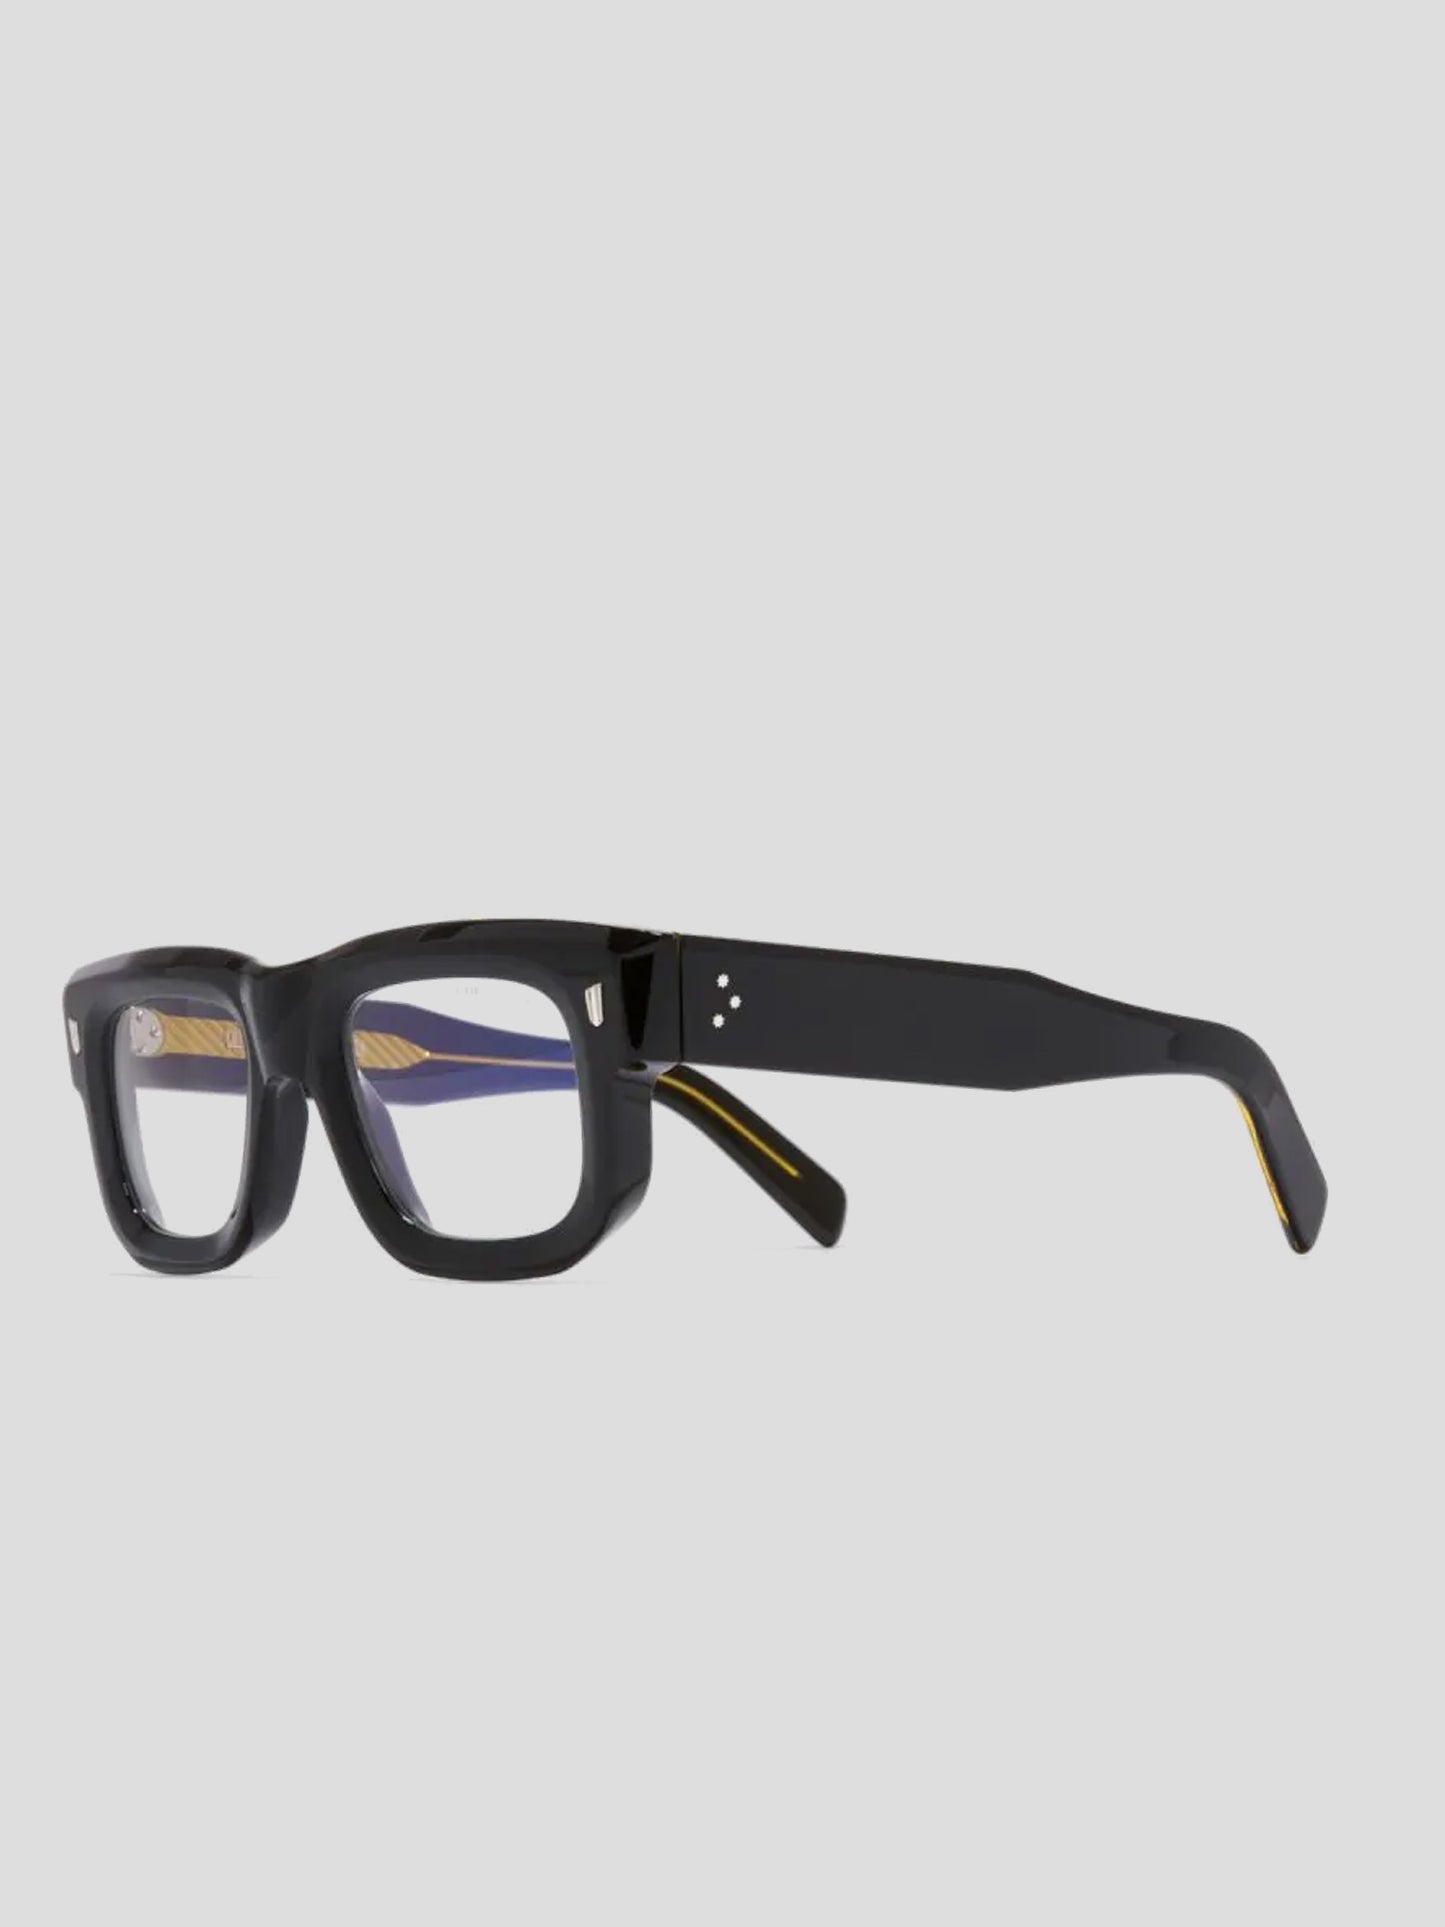 Square Optical Glasses, Black on Yellow